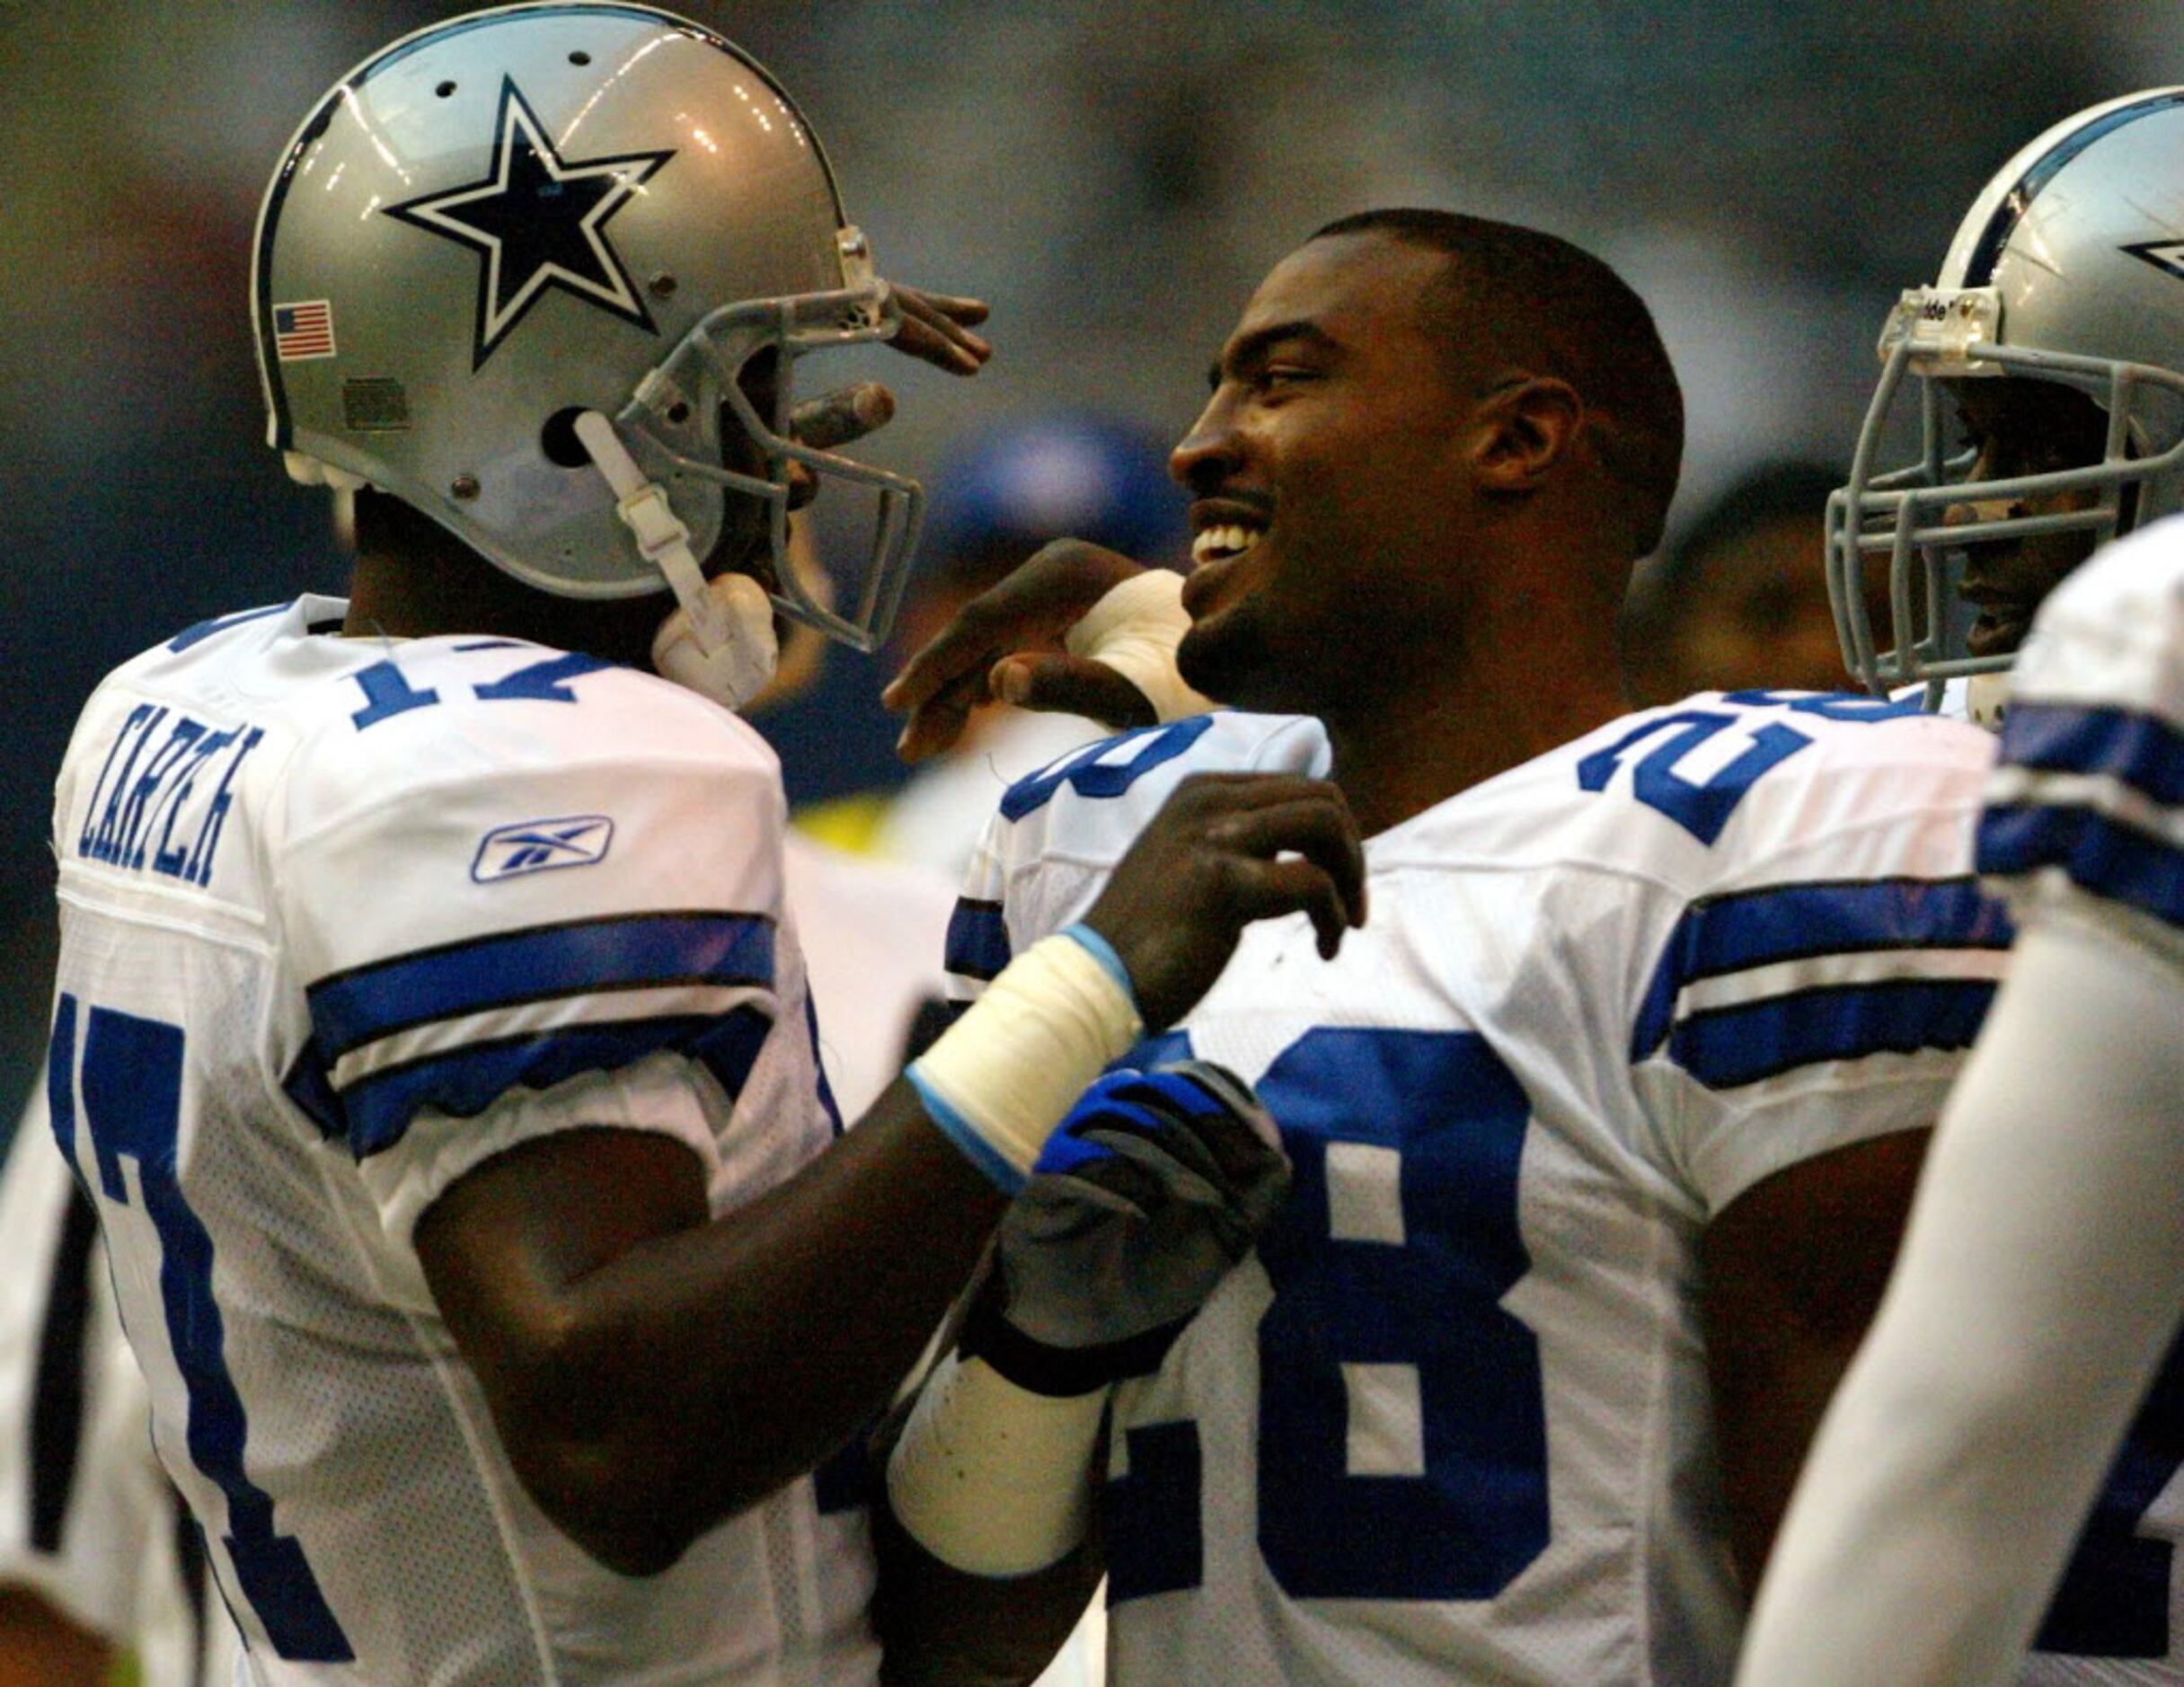 Darren Woodson of the Dallas Cowboys walking on the field during a